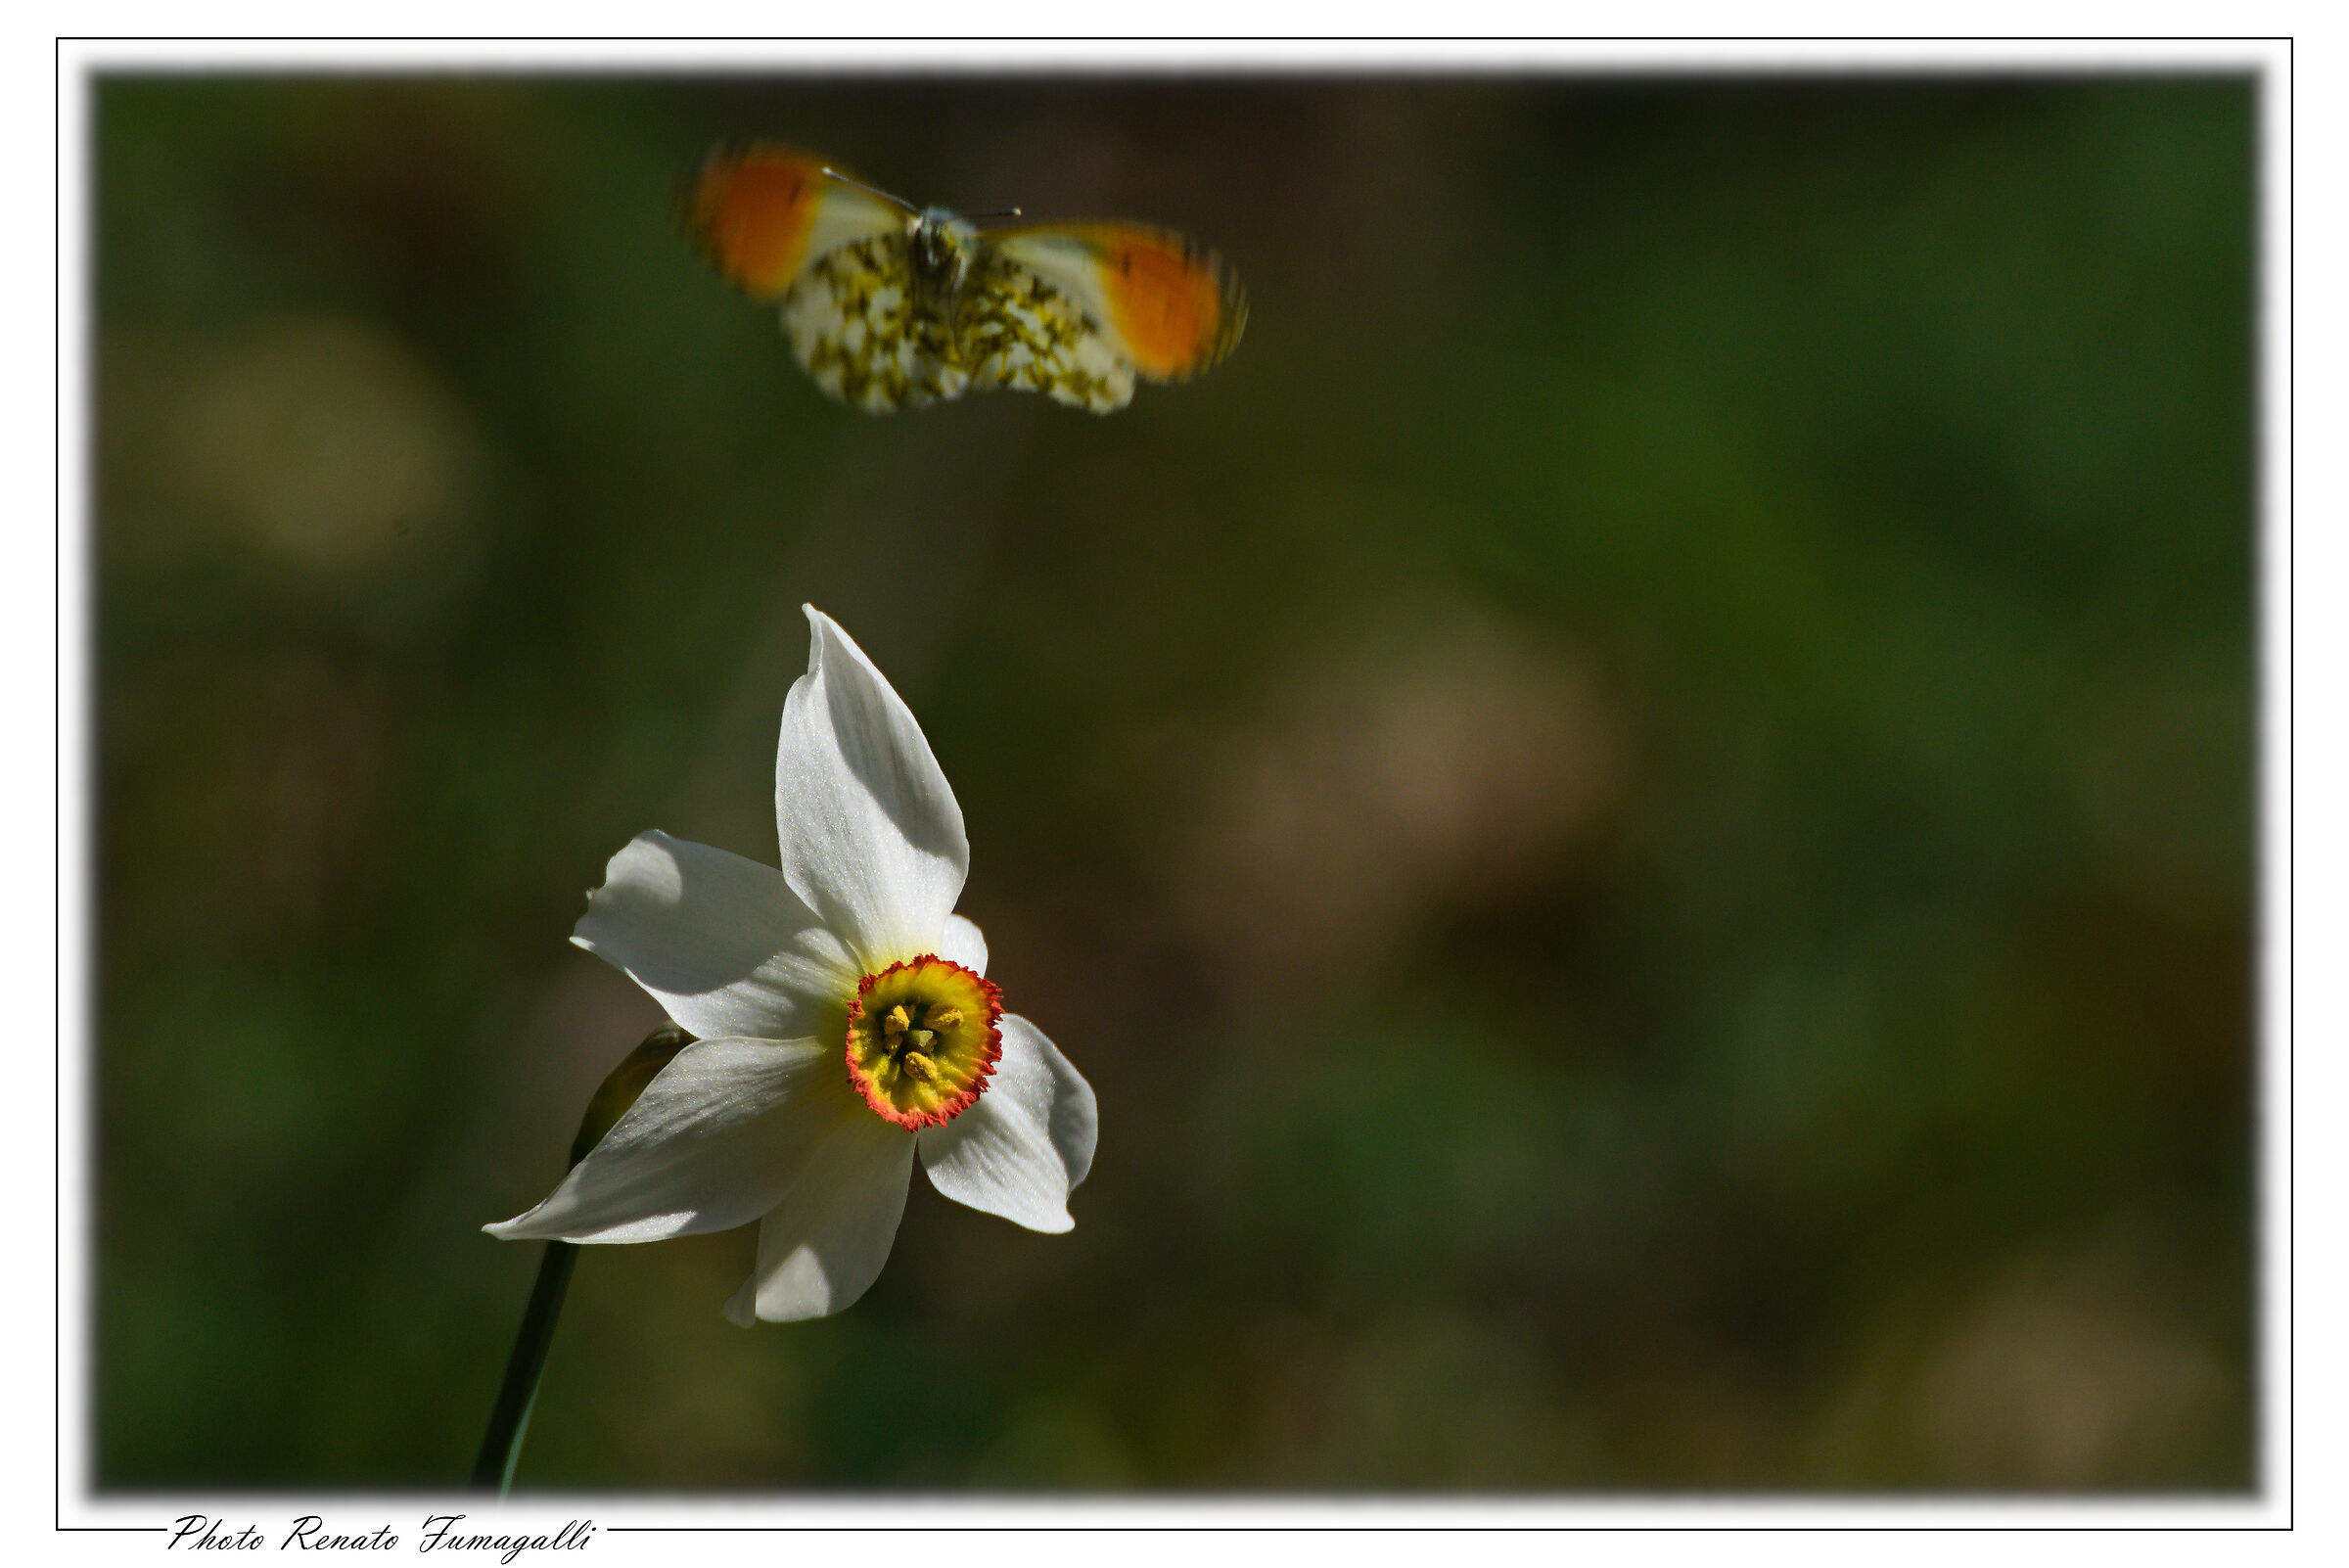 The narcissus and the butterfly...